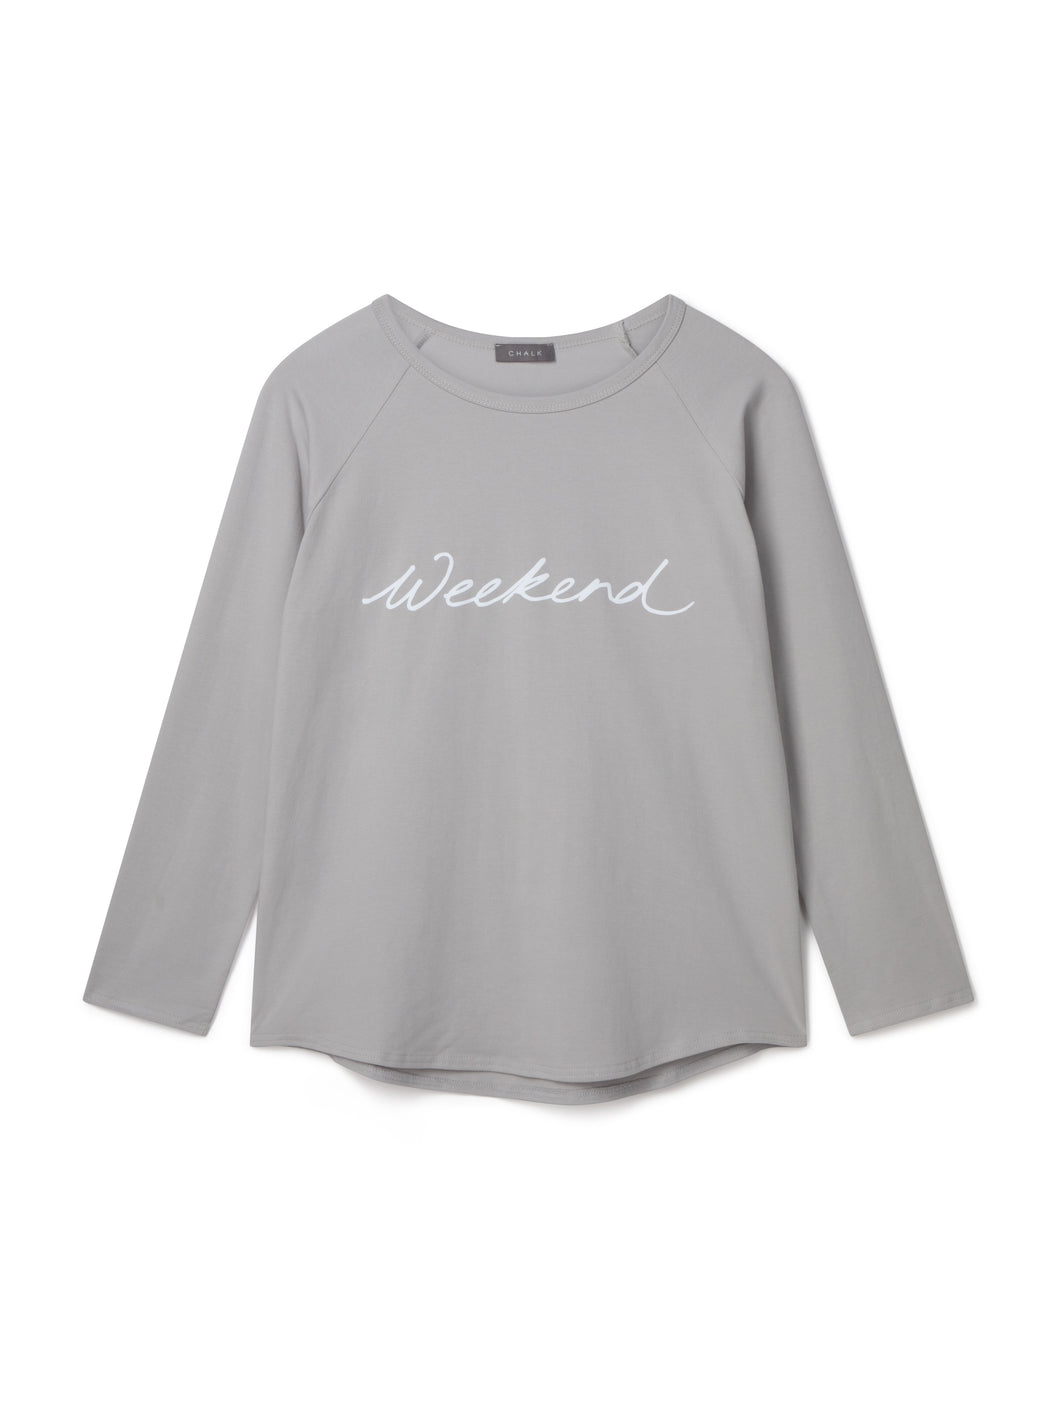 CHALK Weekend Top … 2 colours